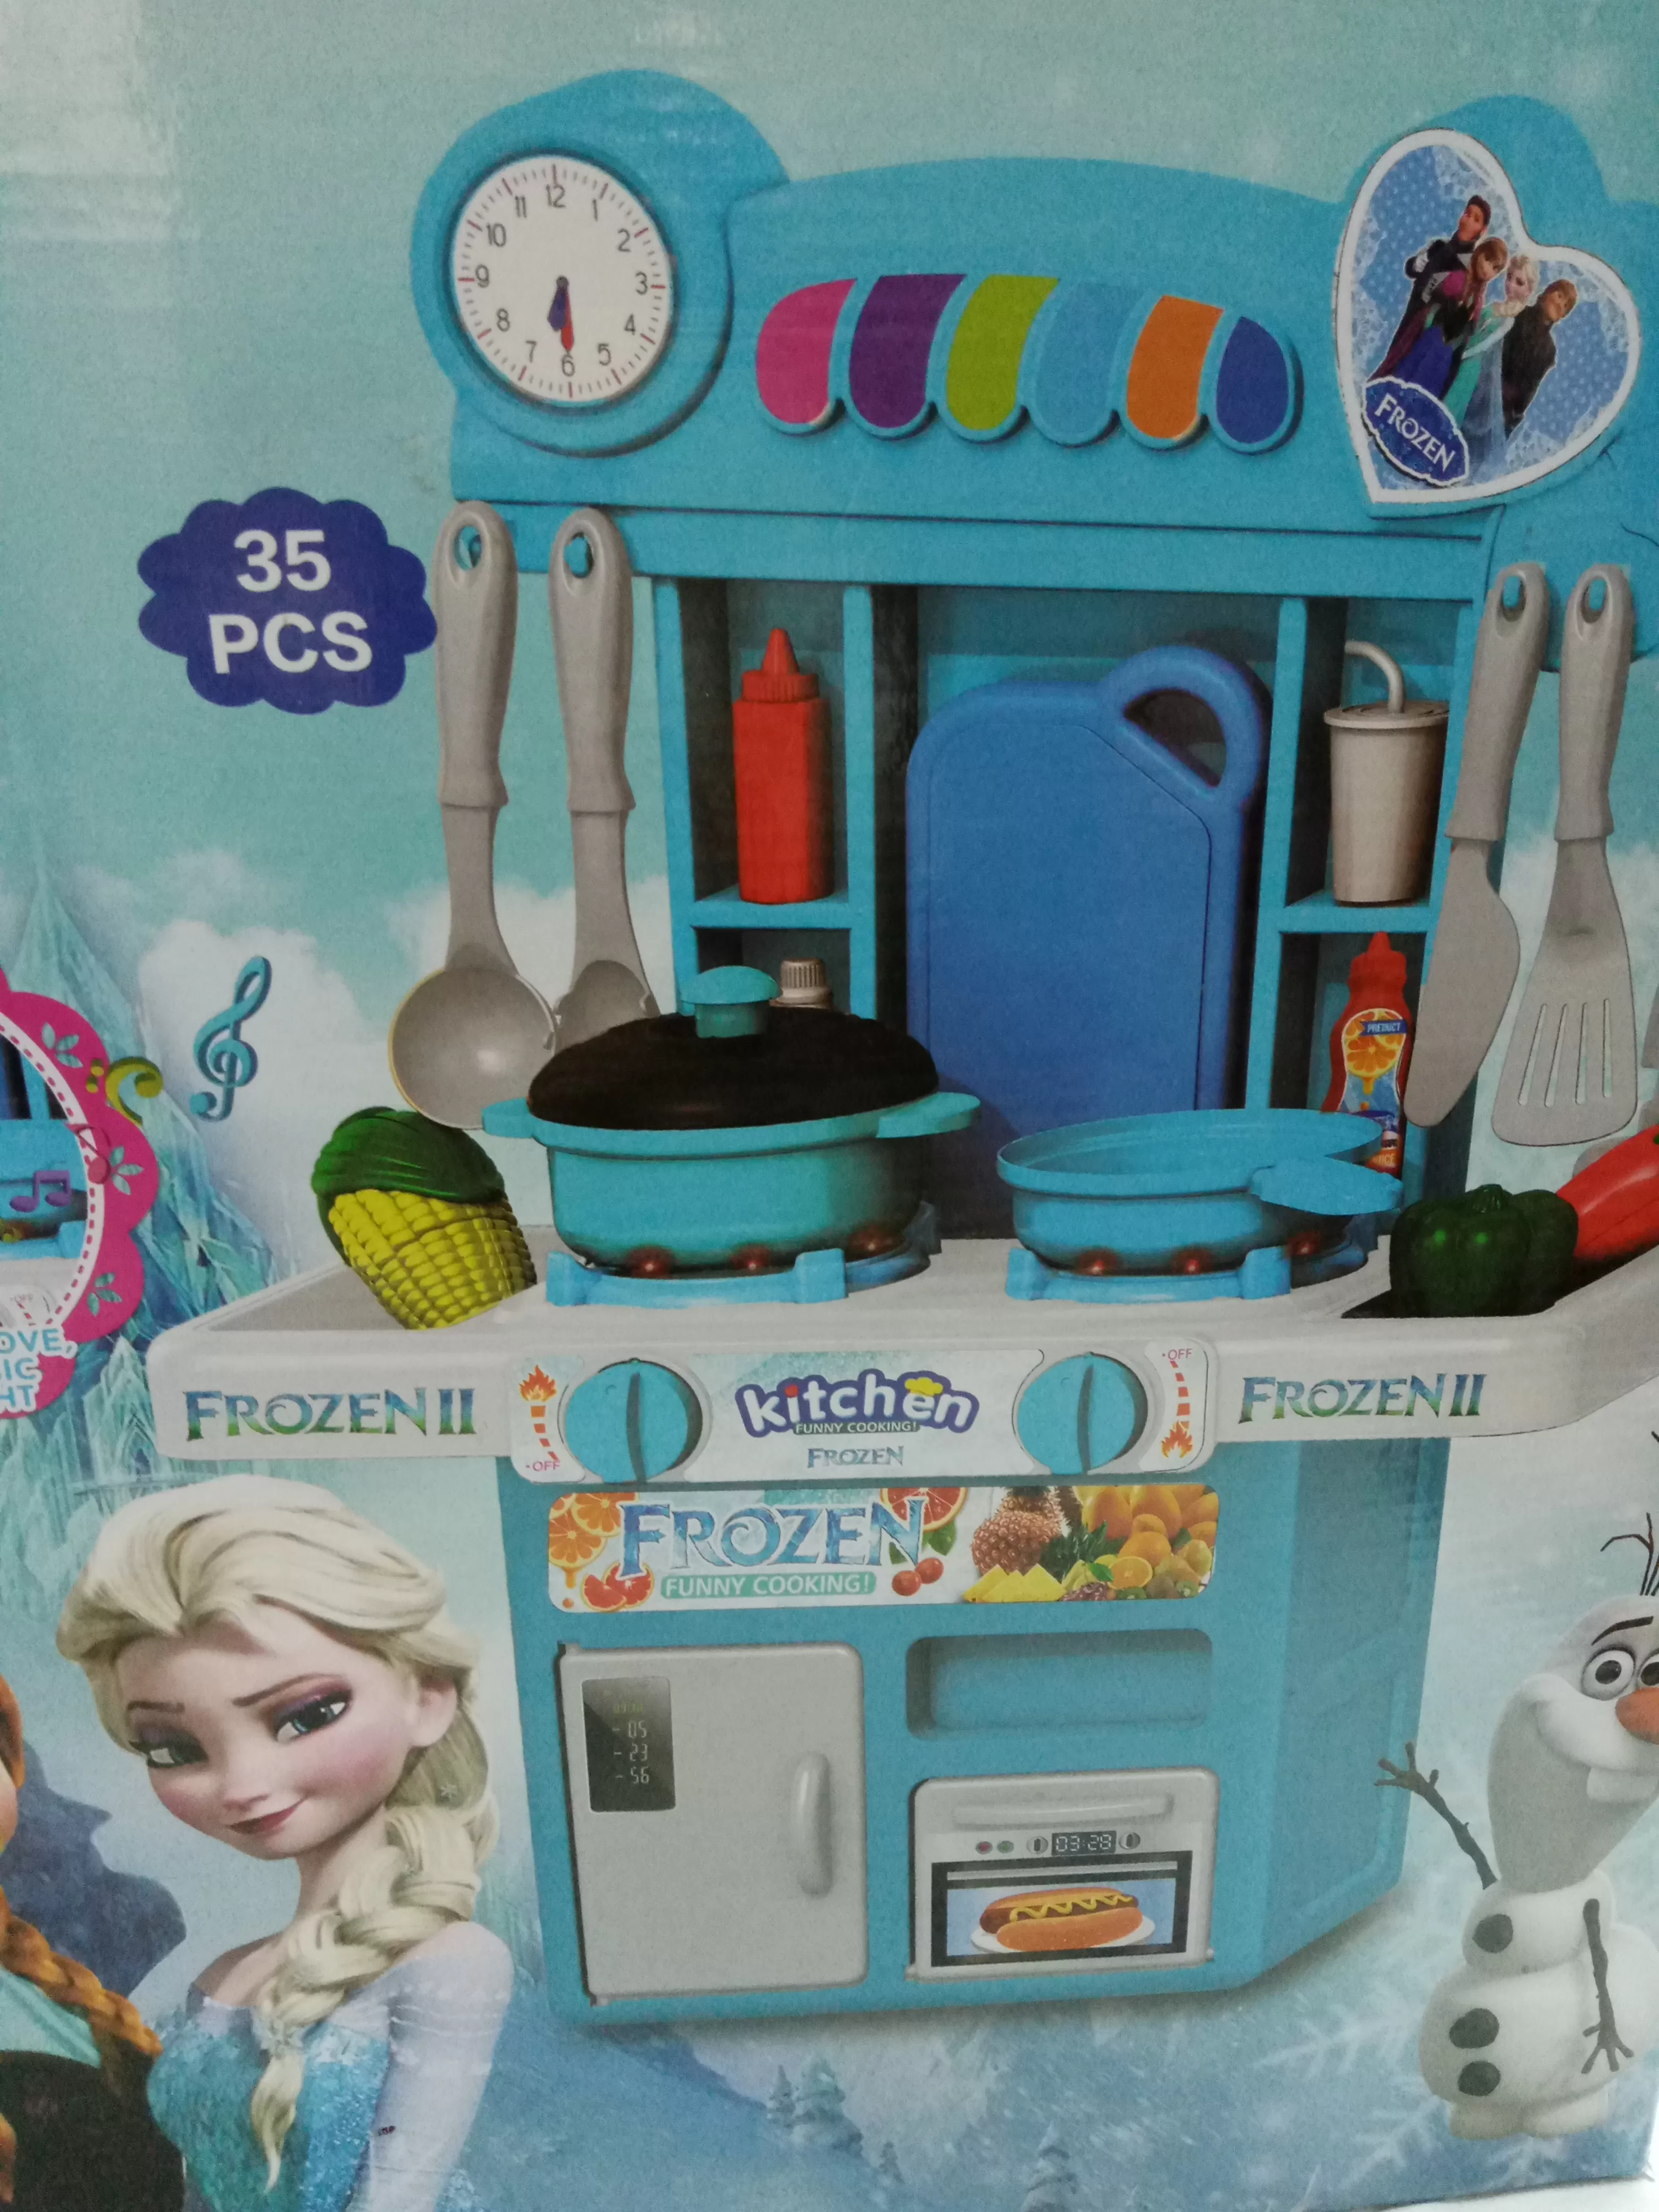 Frozen II - New Edition Kitchen Counter with accessories - 35pcs